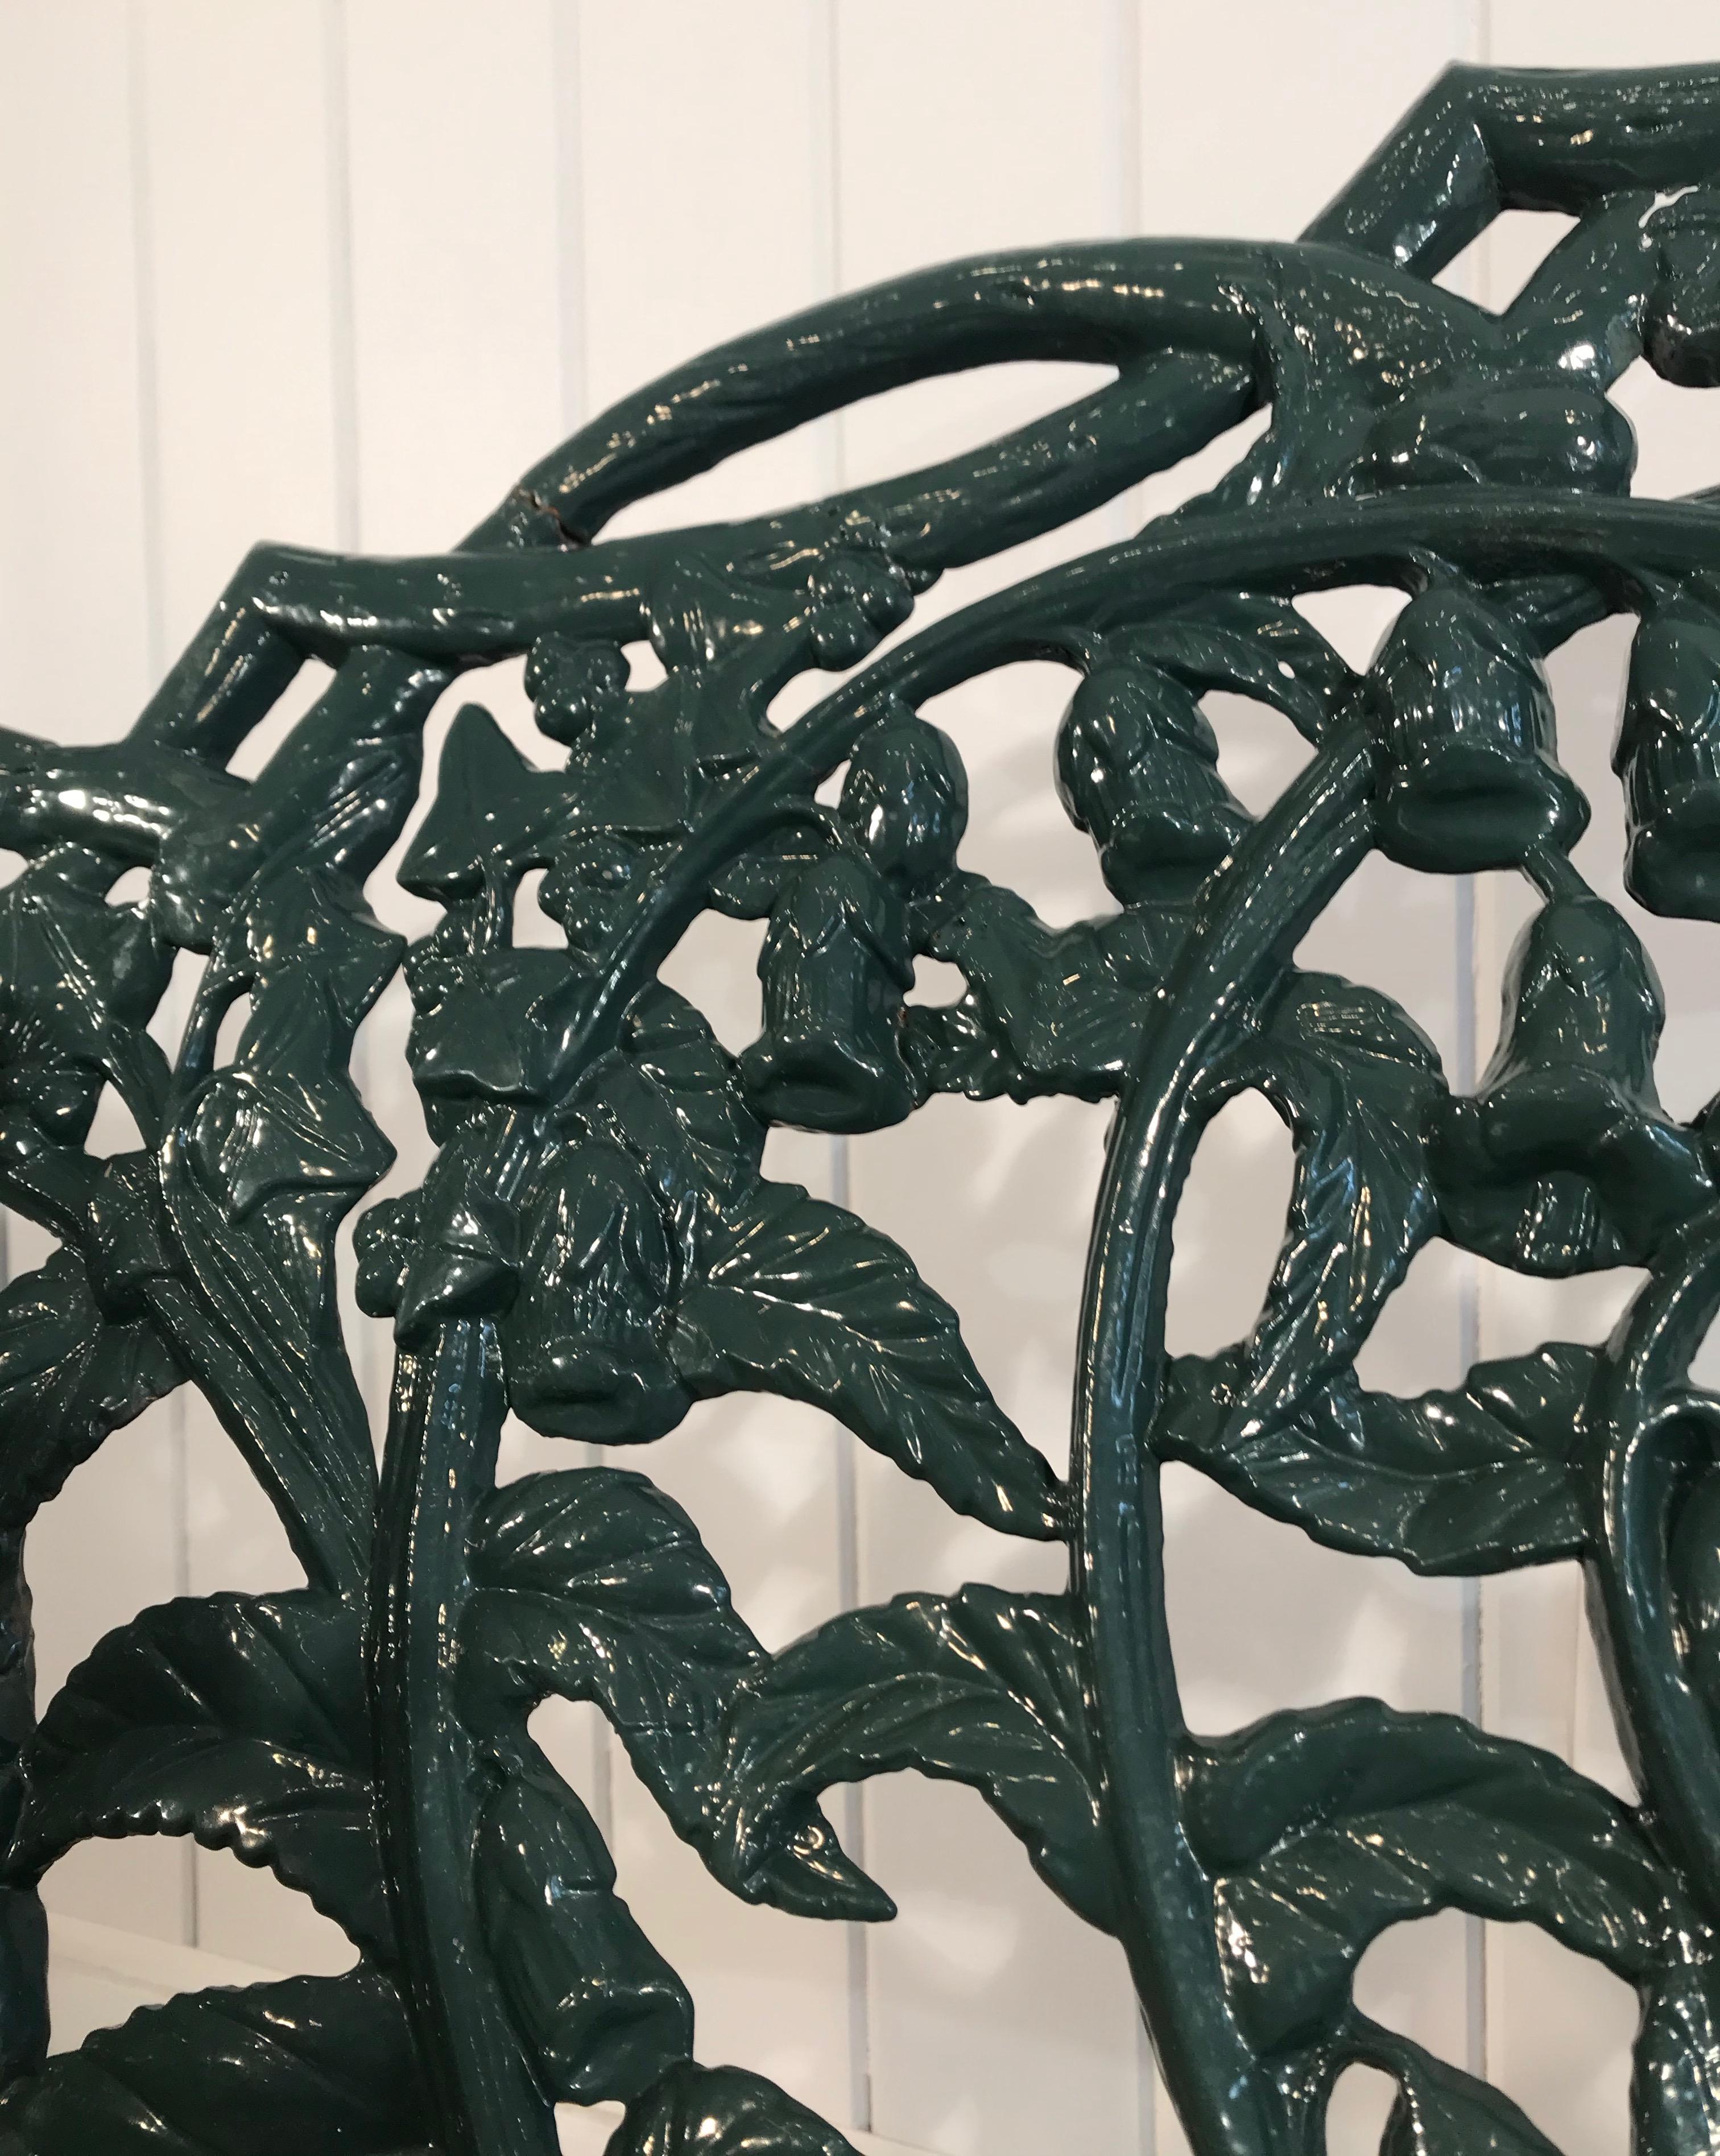 Rose and Thistle Cast Iron Bench by T. Perry and Sons, Glasgow, 1858 For Sale 7